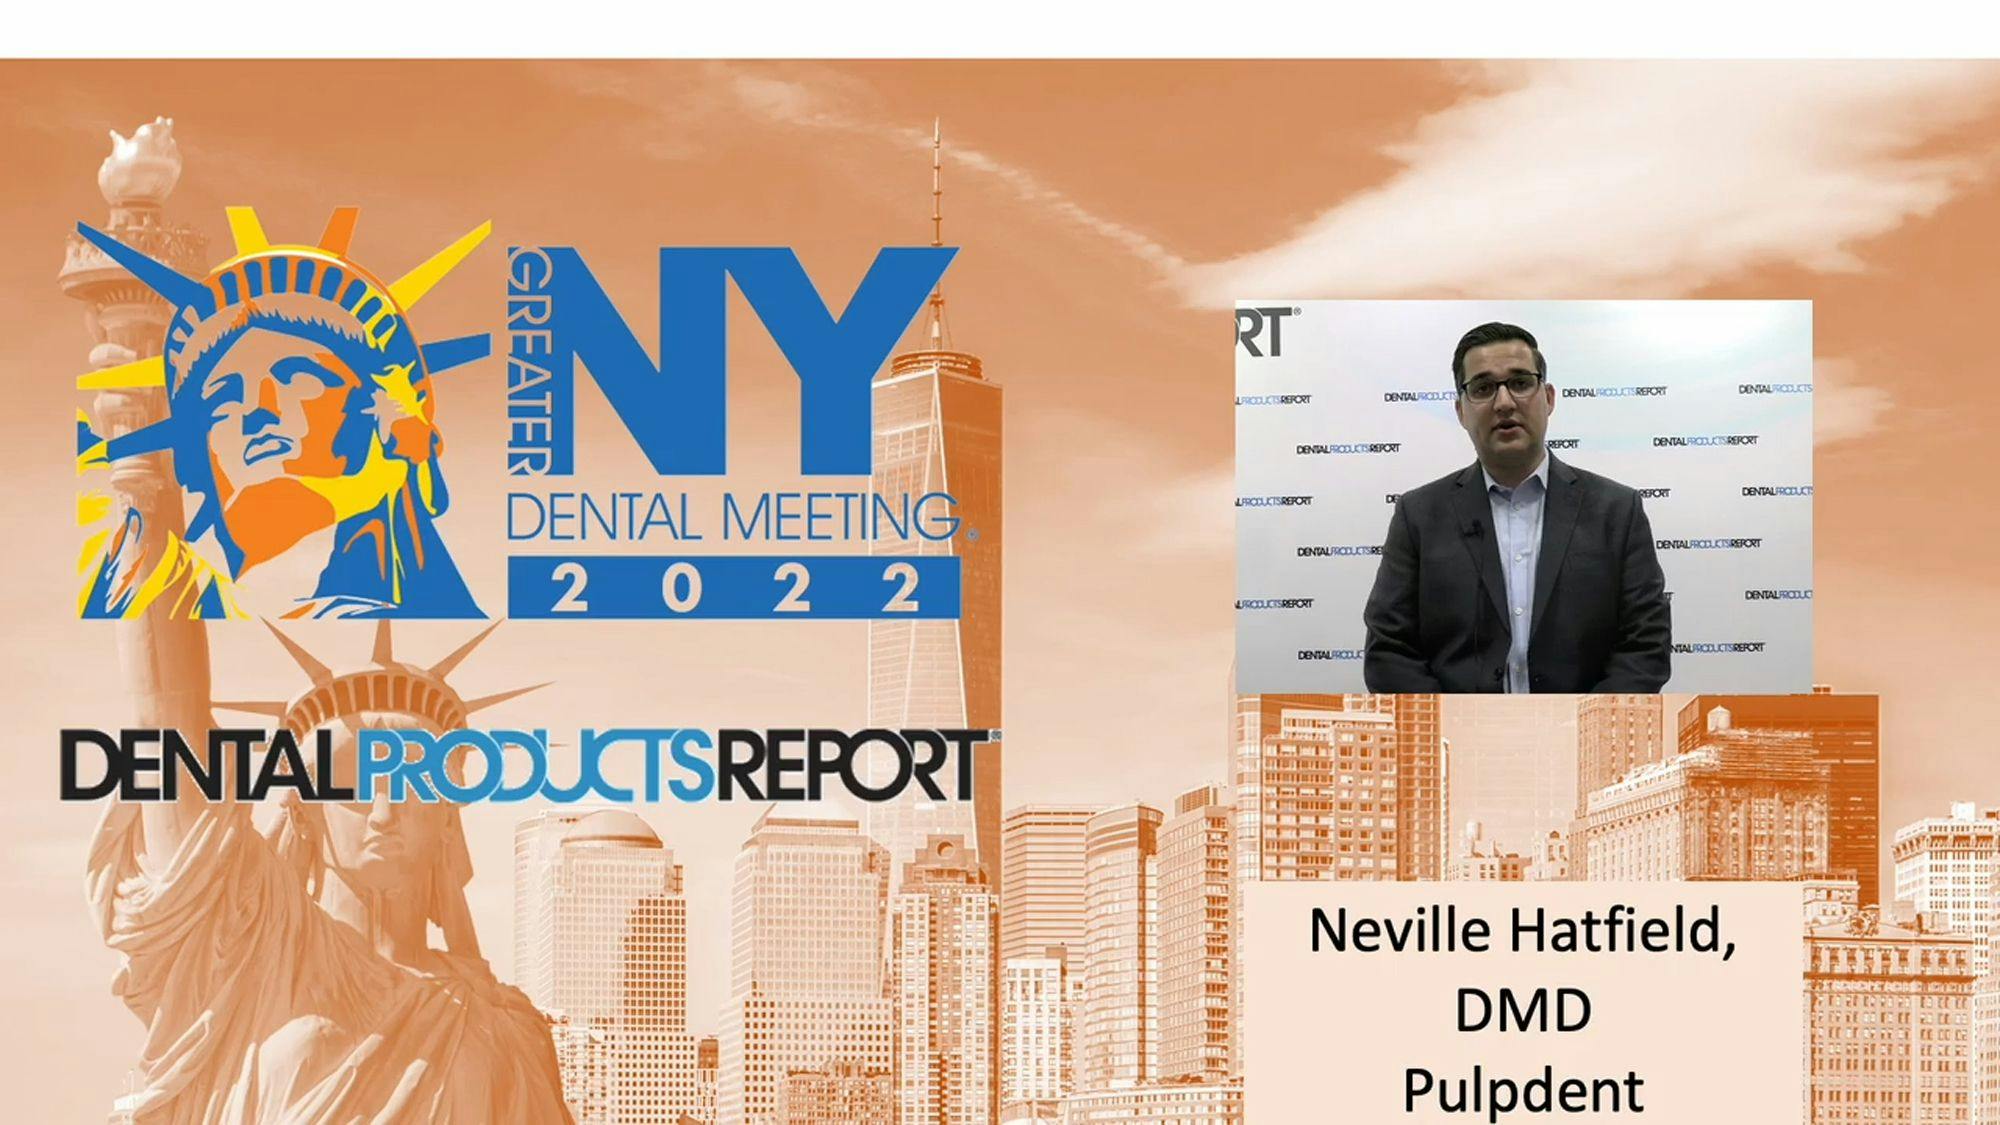 Greater New York Dental Meeting 2022: Interview with Neville Hatfield, DMD, Pulpdent